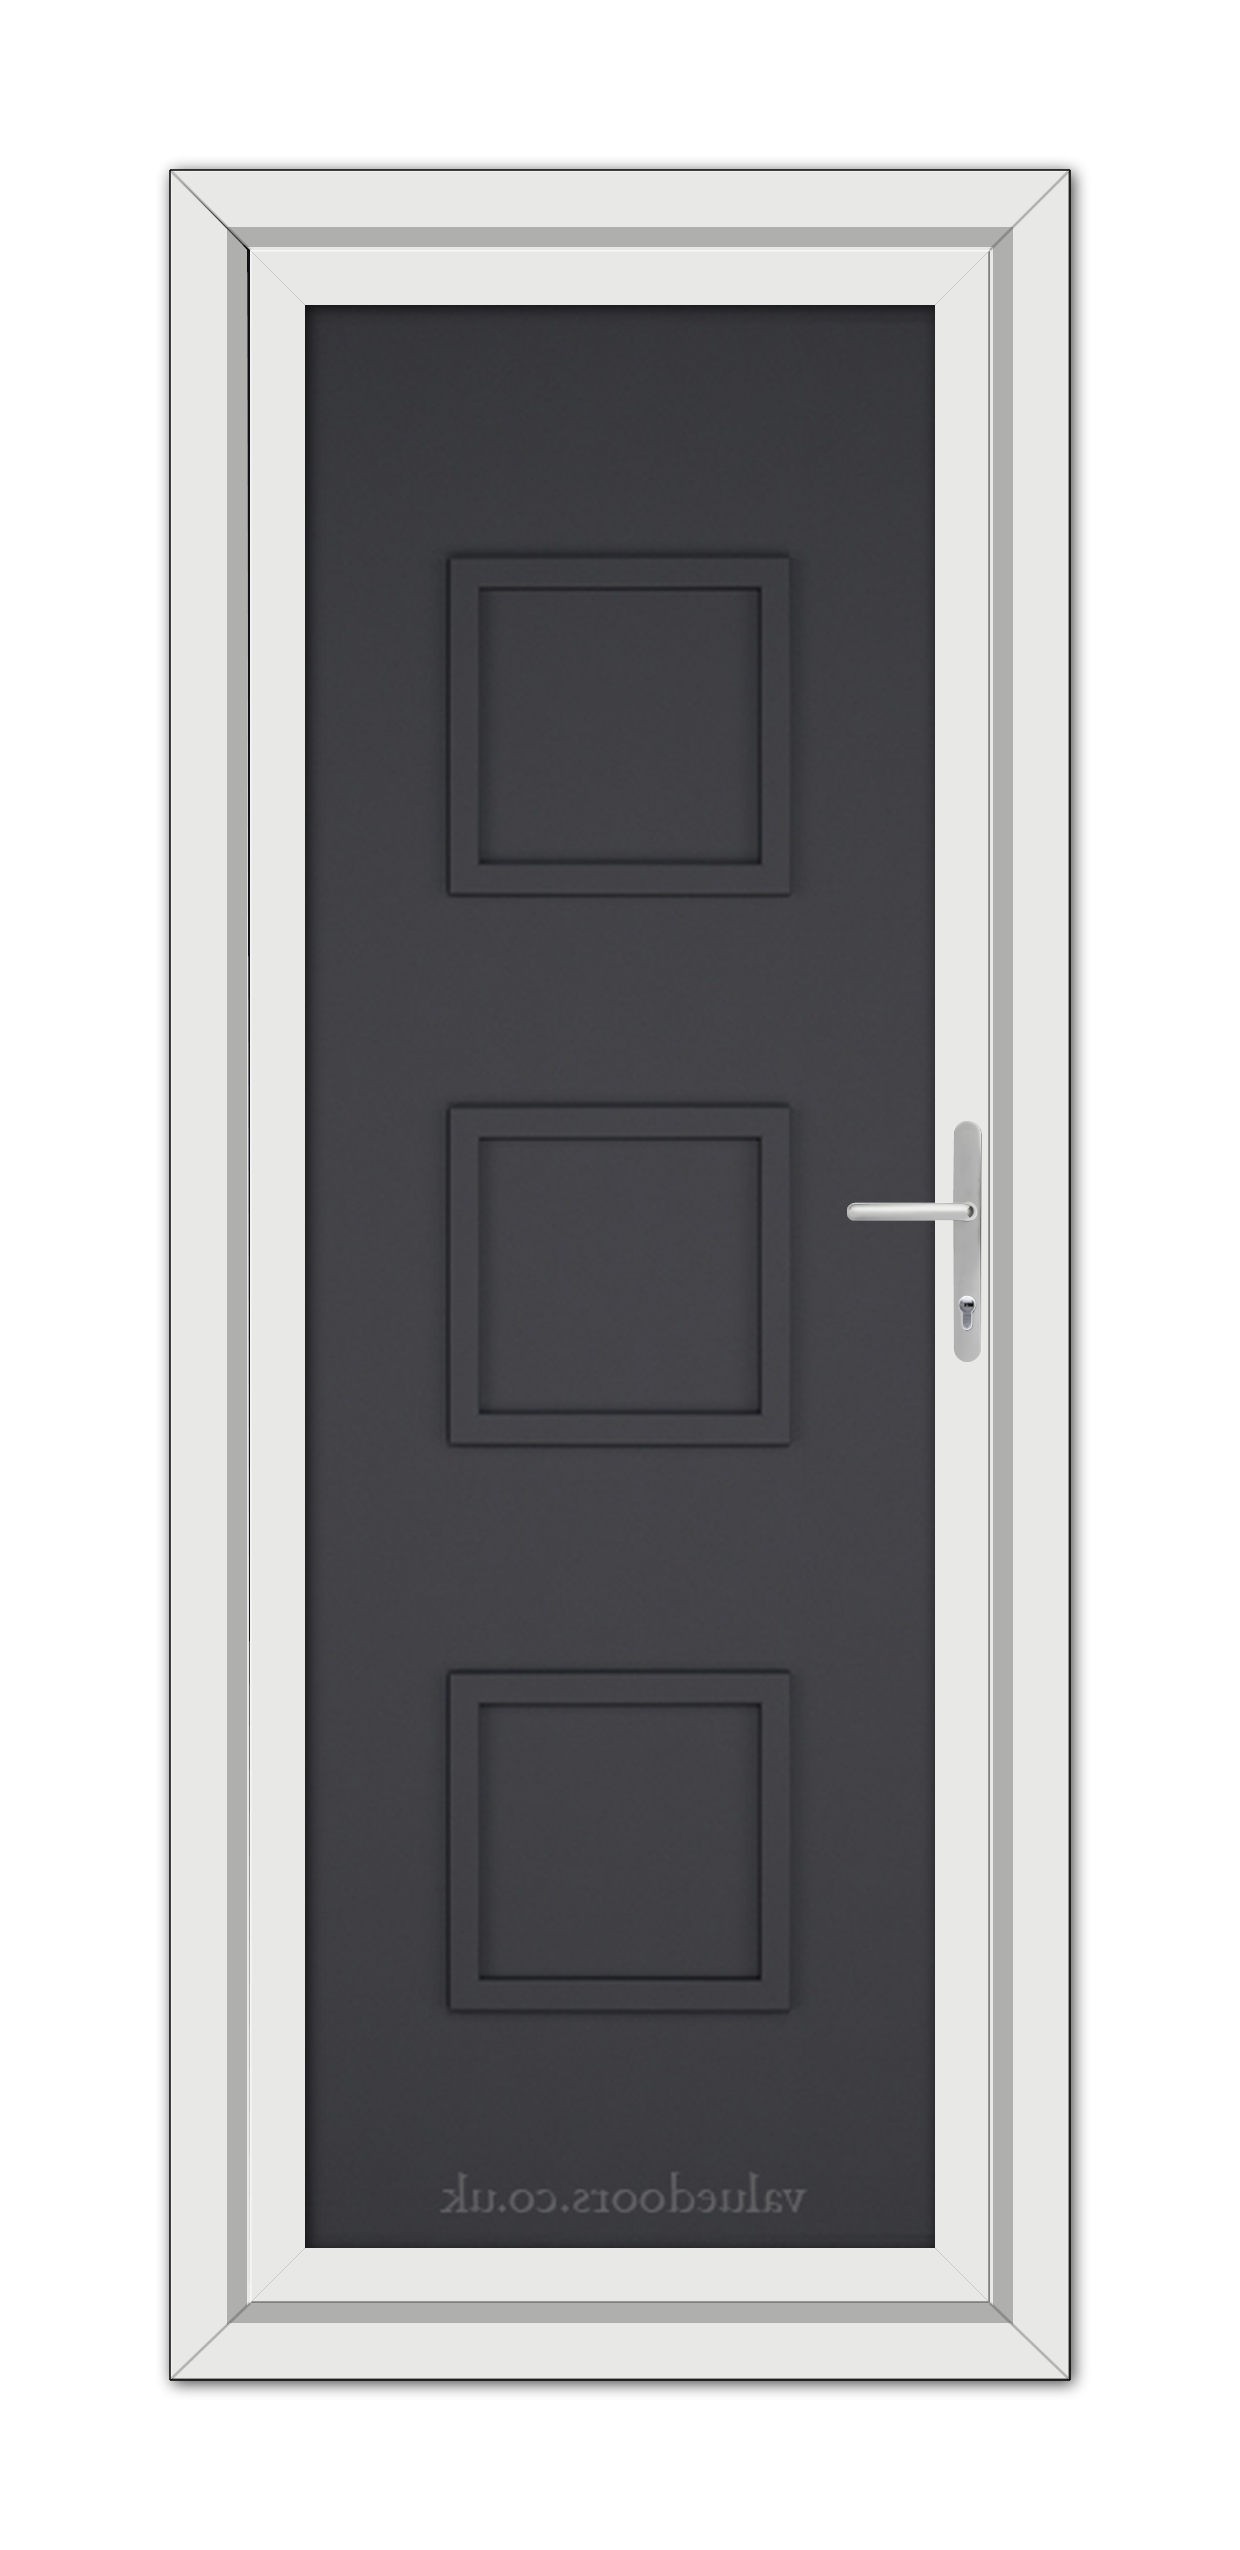 A Grey Modern 5013 Solid uPVC door with three panels and a silver handle, framed with a white trim, set against a white background.